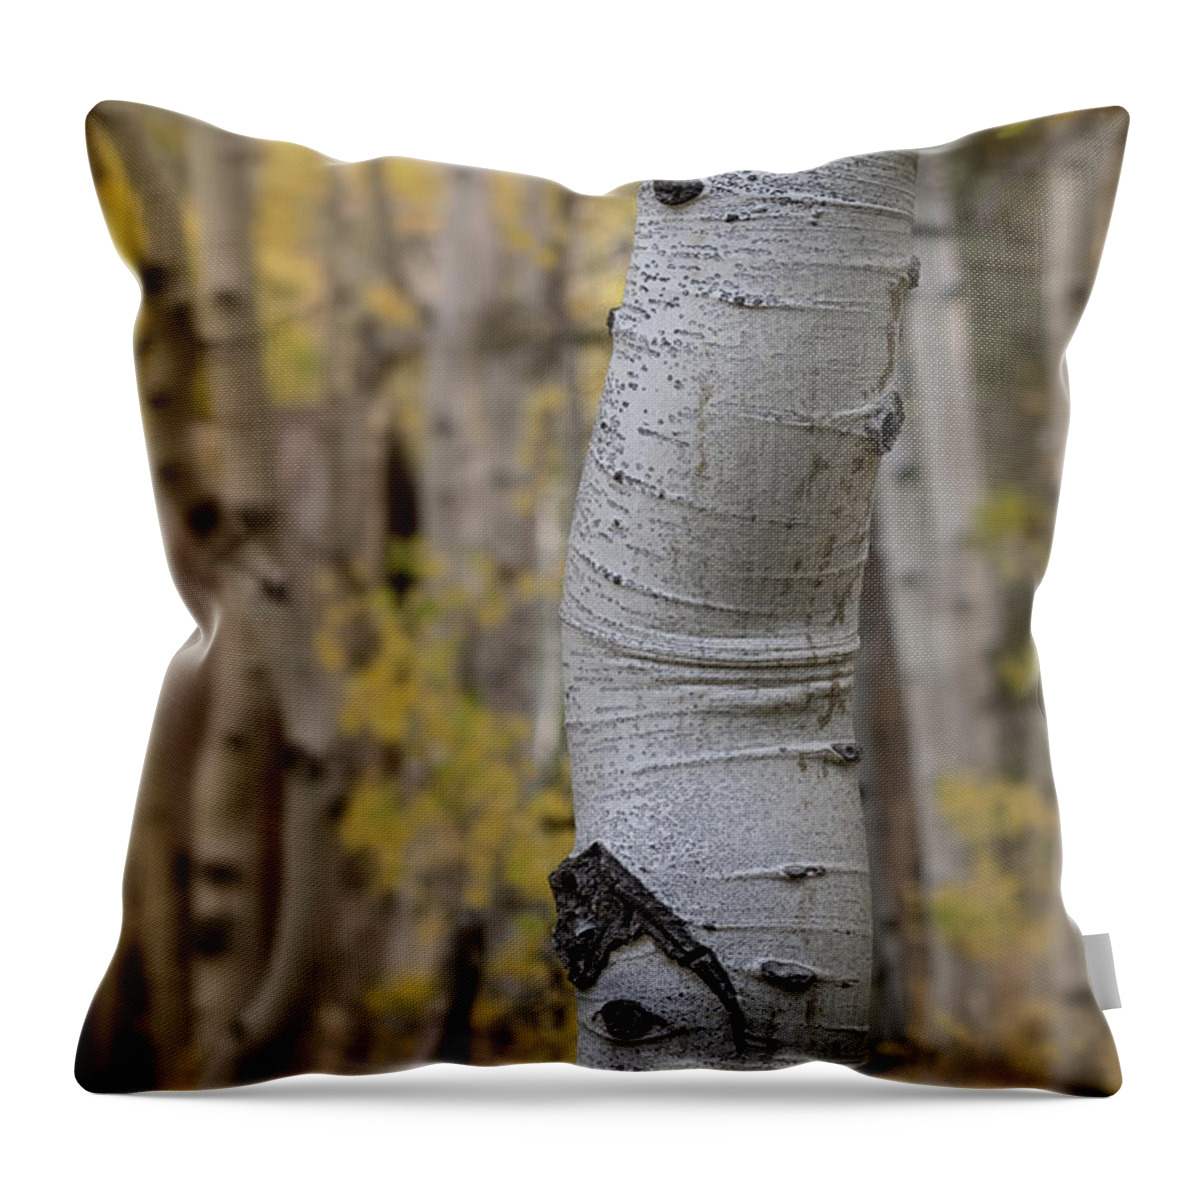 Aspen Throw Pillow featuring the photograph Cabin Series 2, Sorensens Resort by Alessandra RC